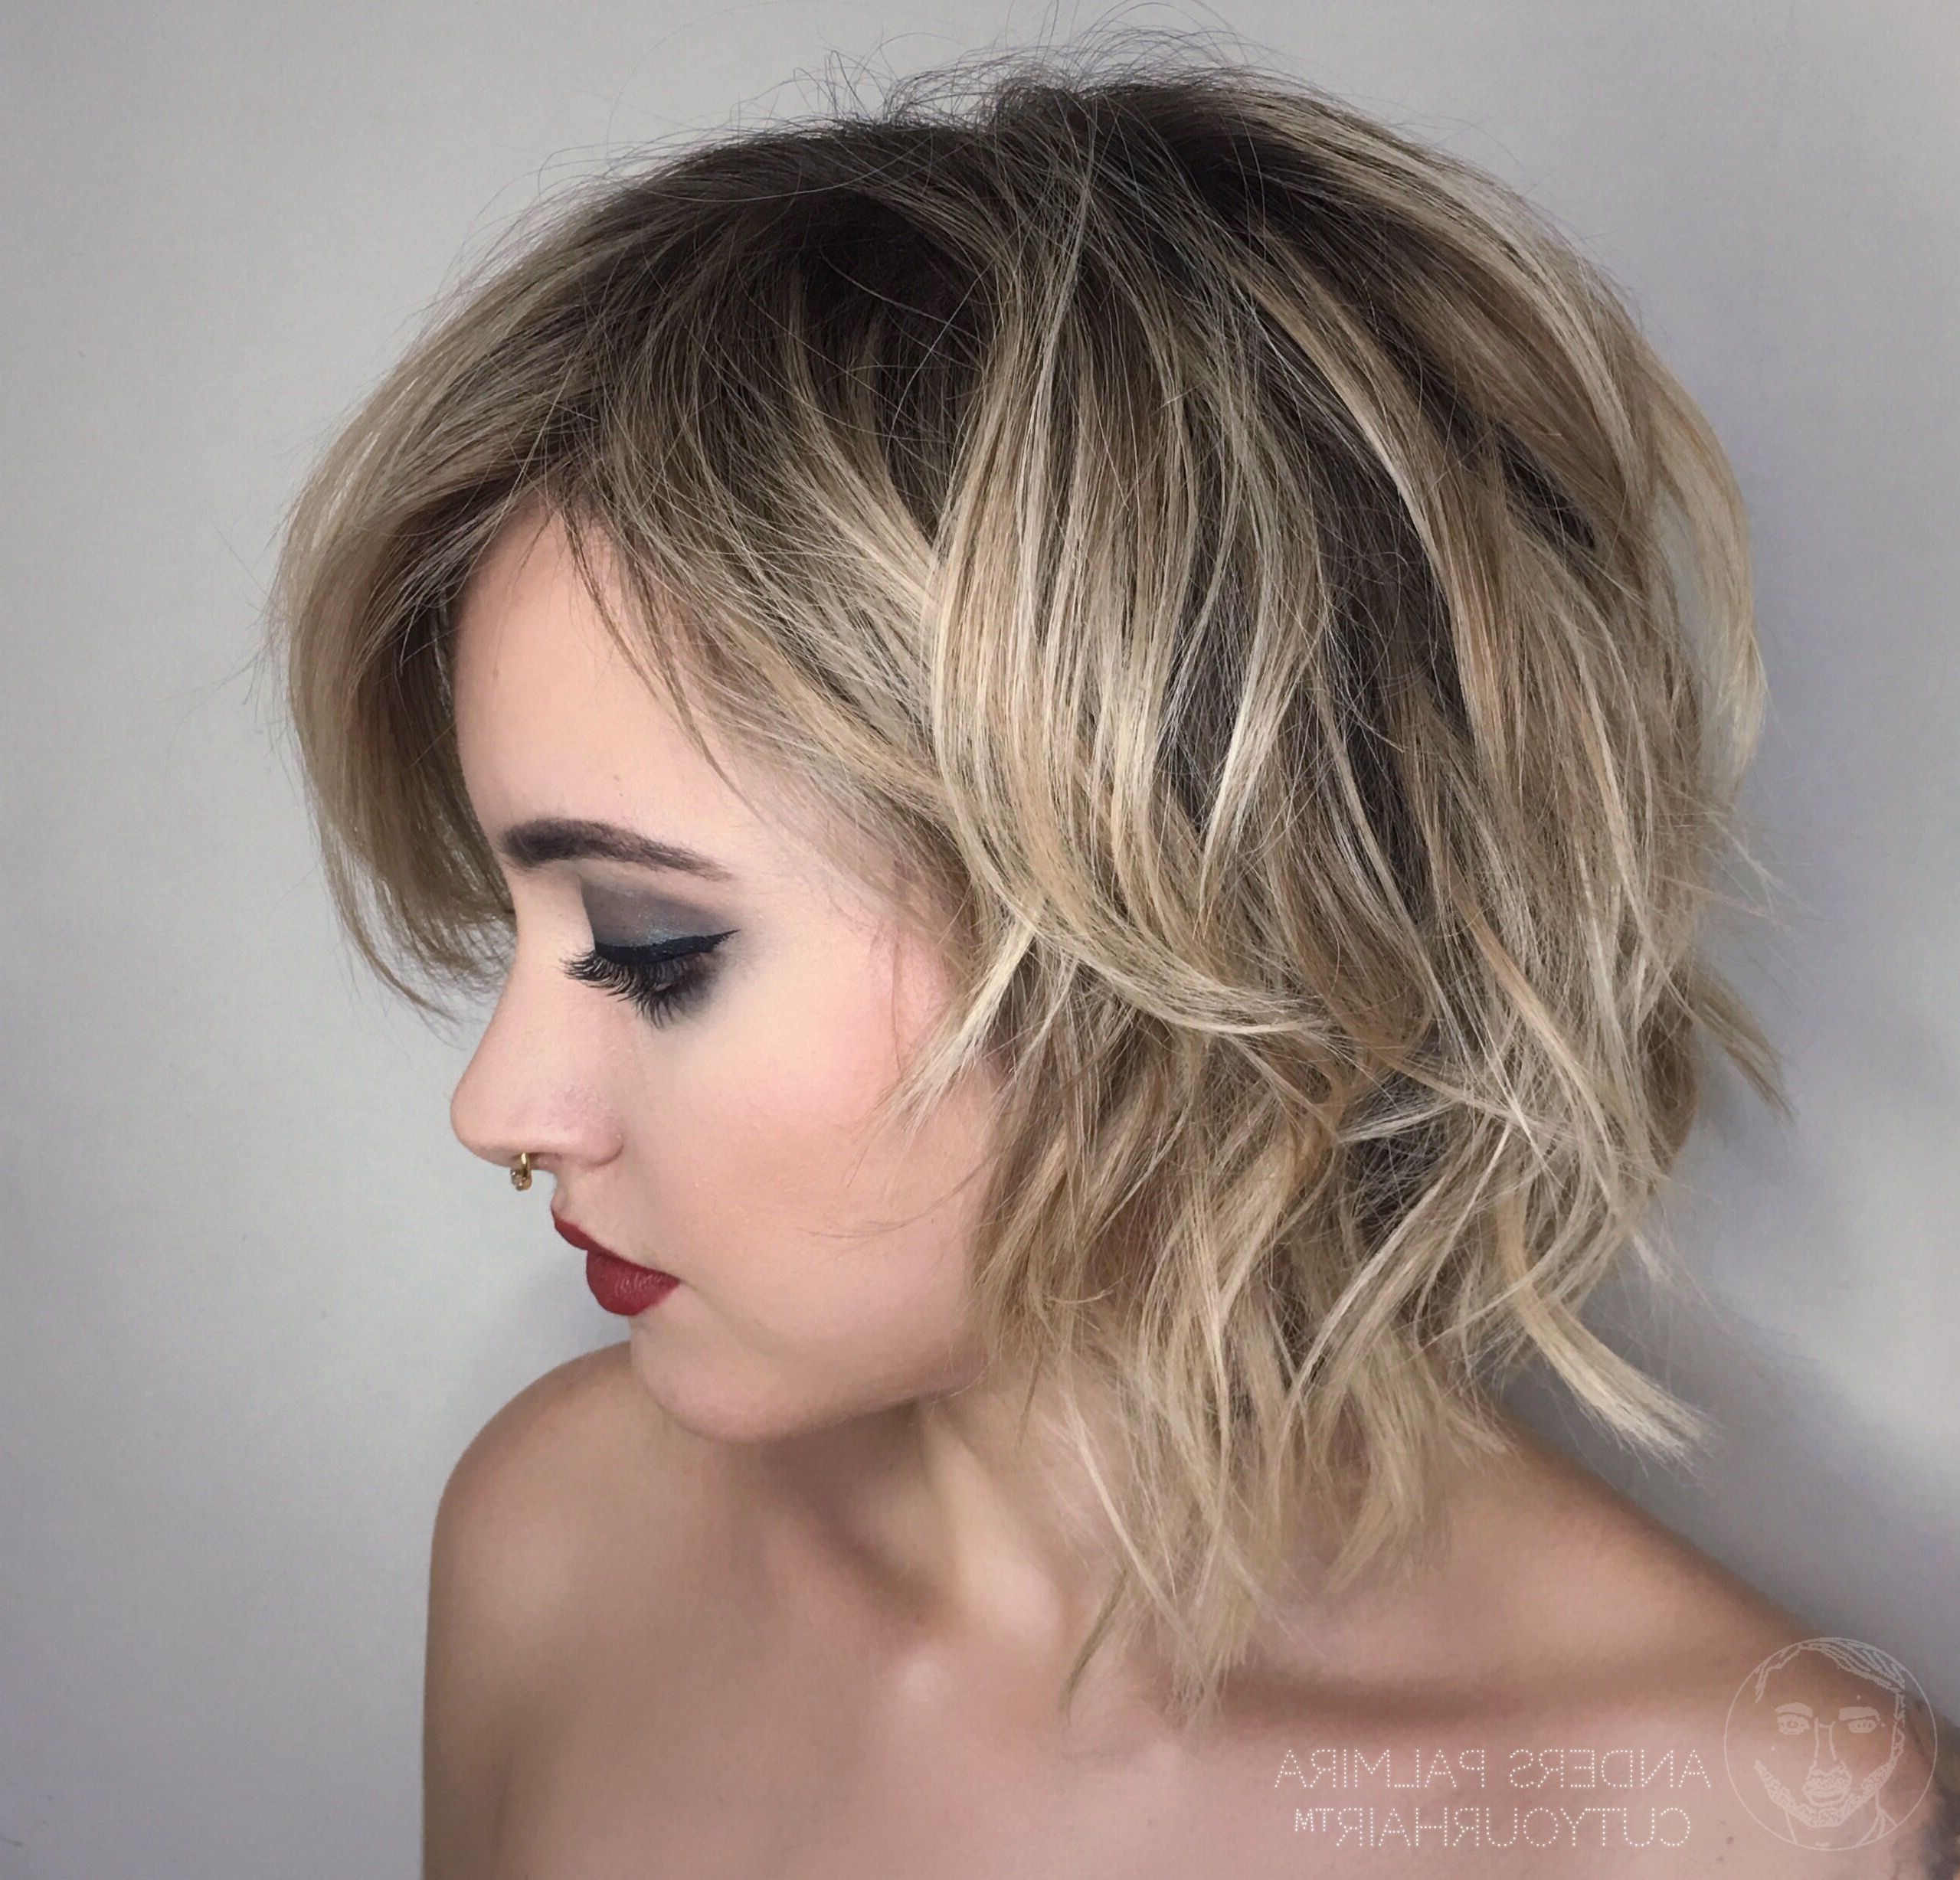 Summer Style: Beach Wavy Hairstyles | Hair & Pretty Faces In Super Short Haircuts For Girls (View 16 of 25)